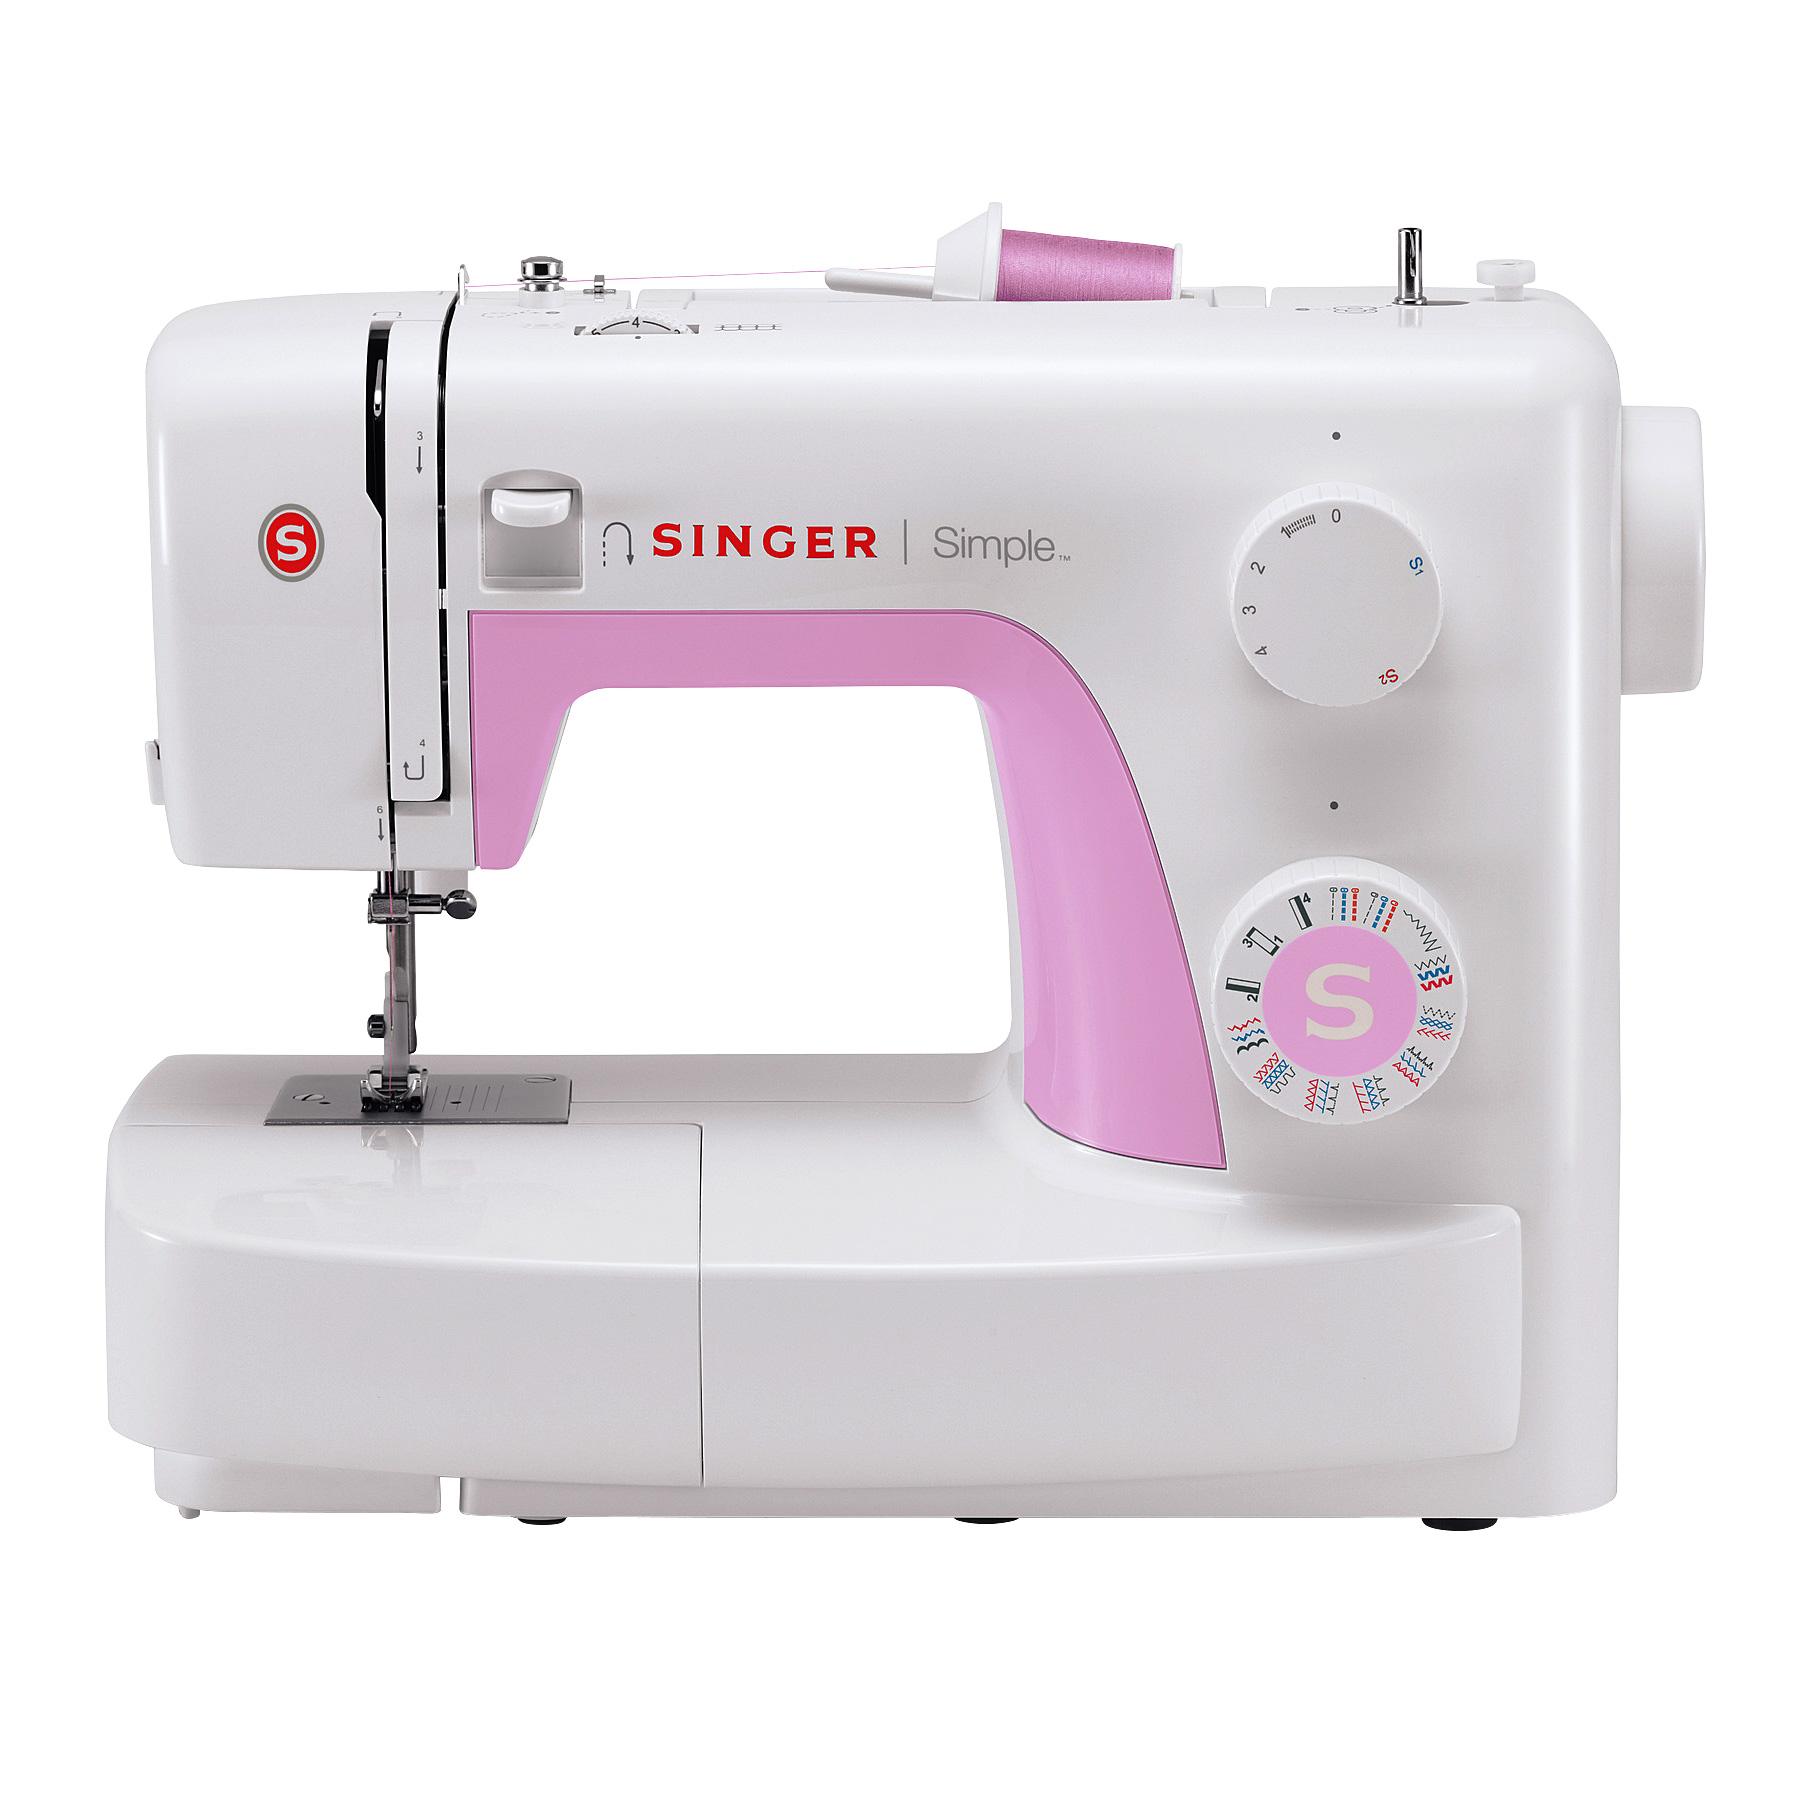  120V 15W Appliance, Vacuum Cleaner, Sewing Machine